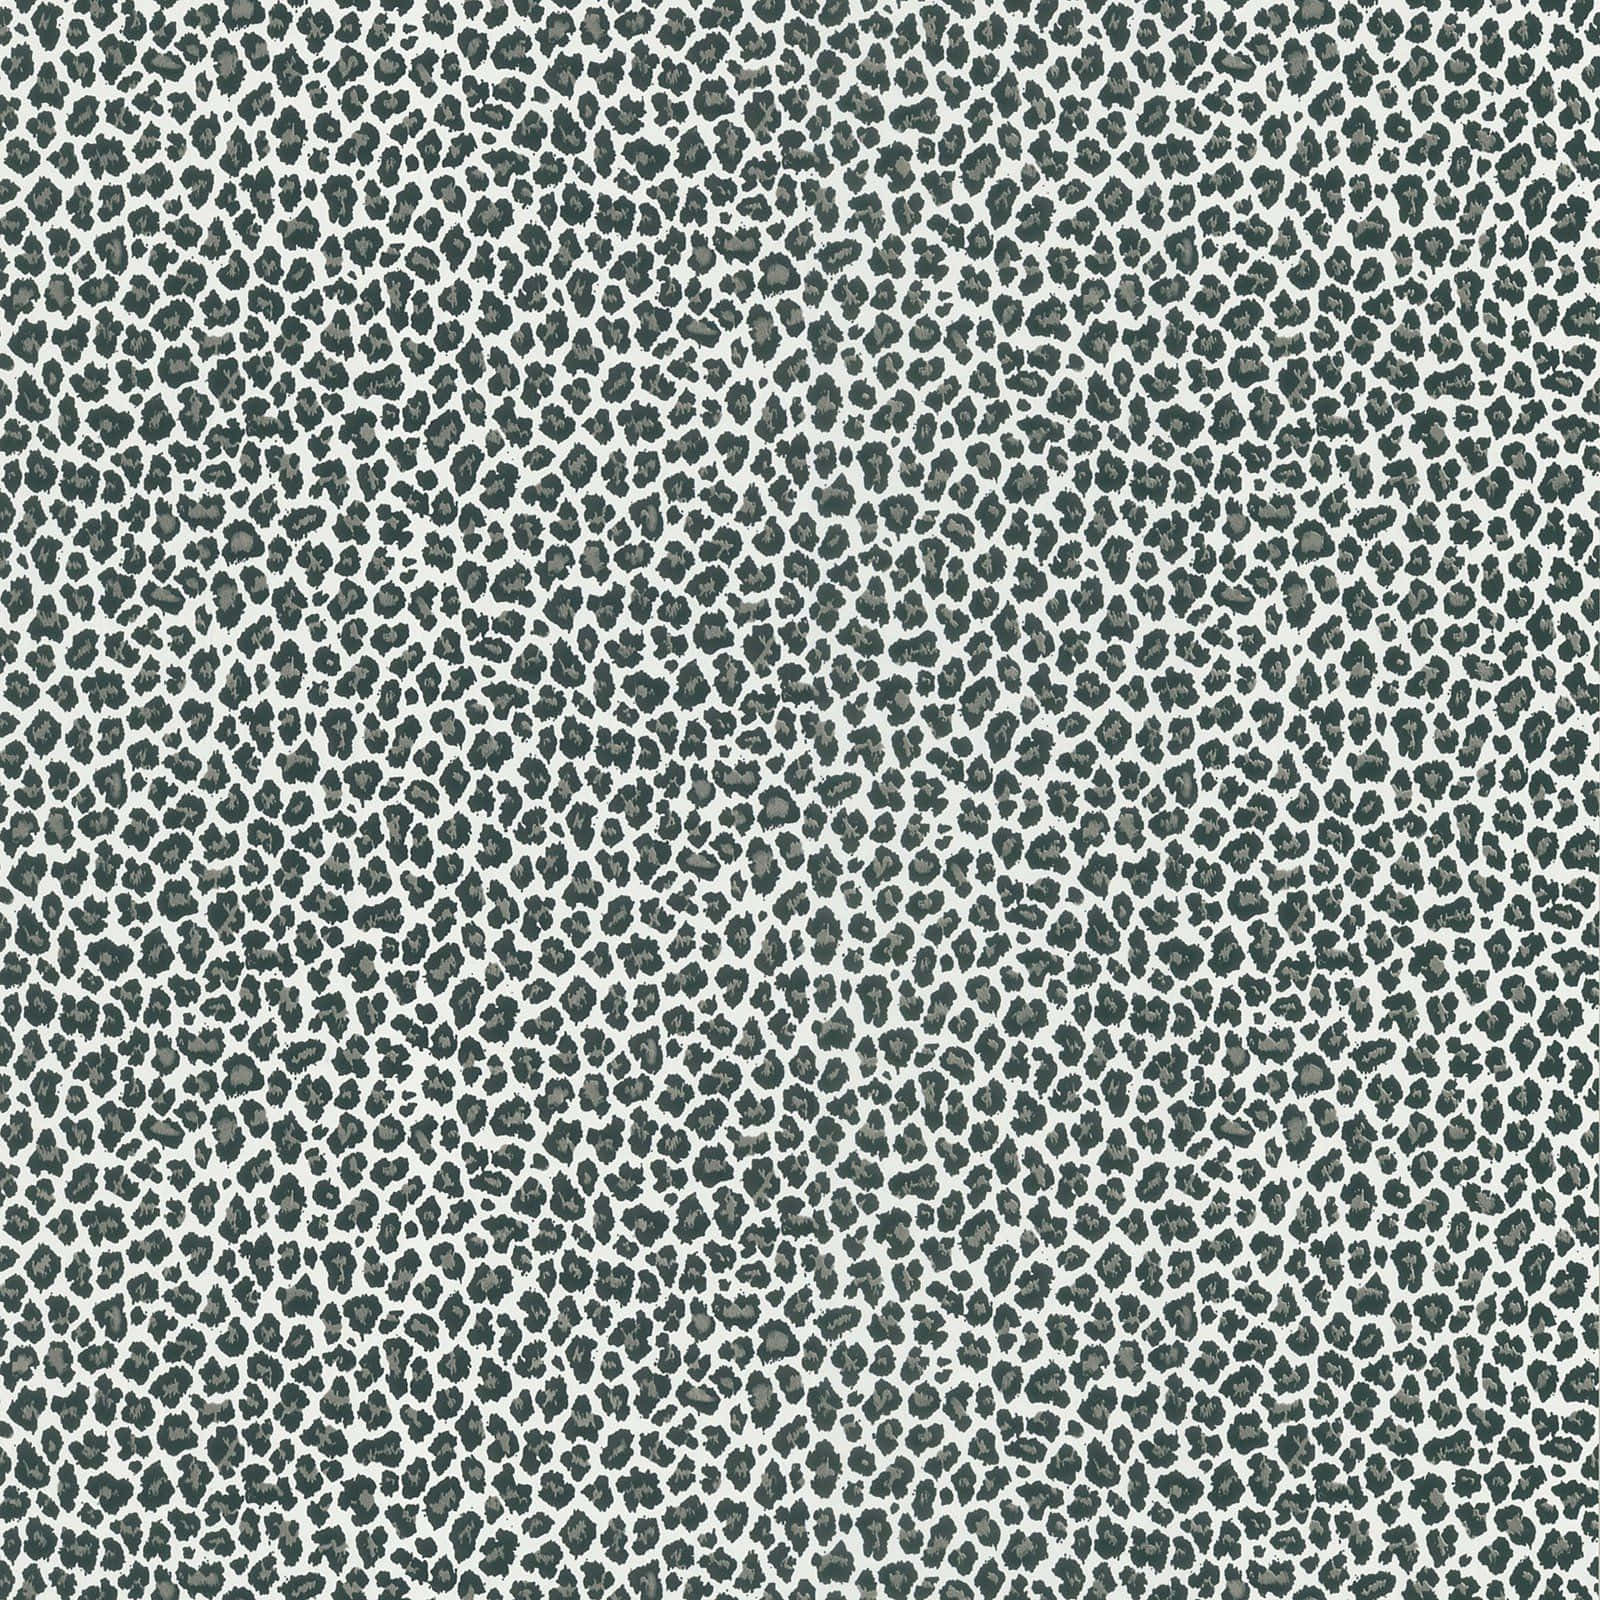 A Black And White Leopard Print Wallpaper